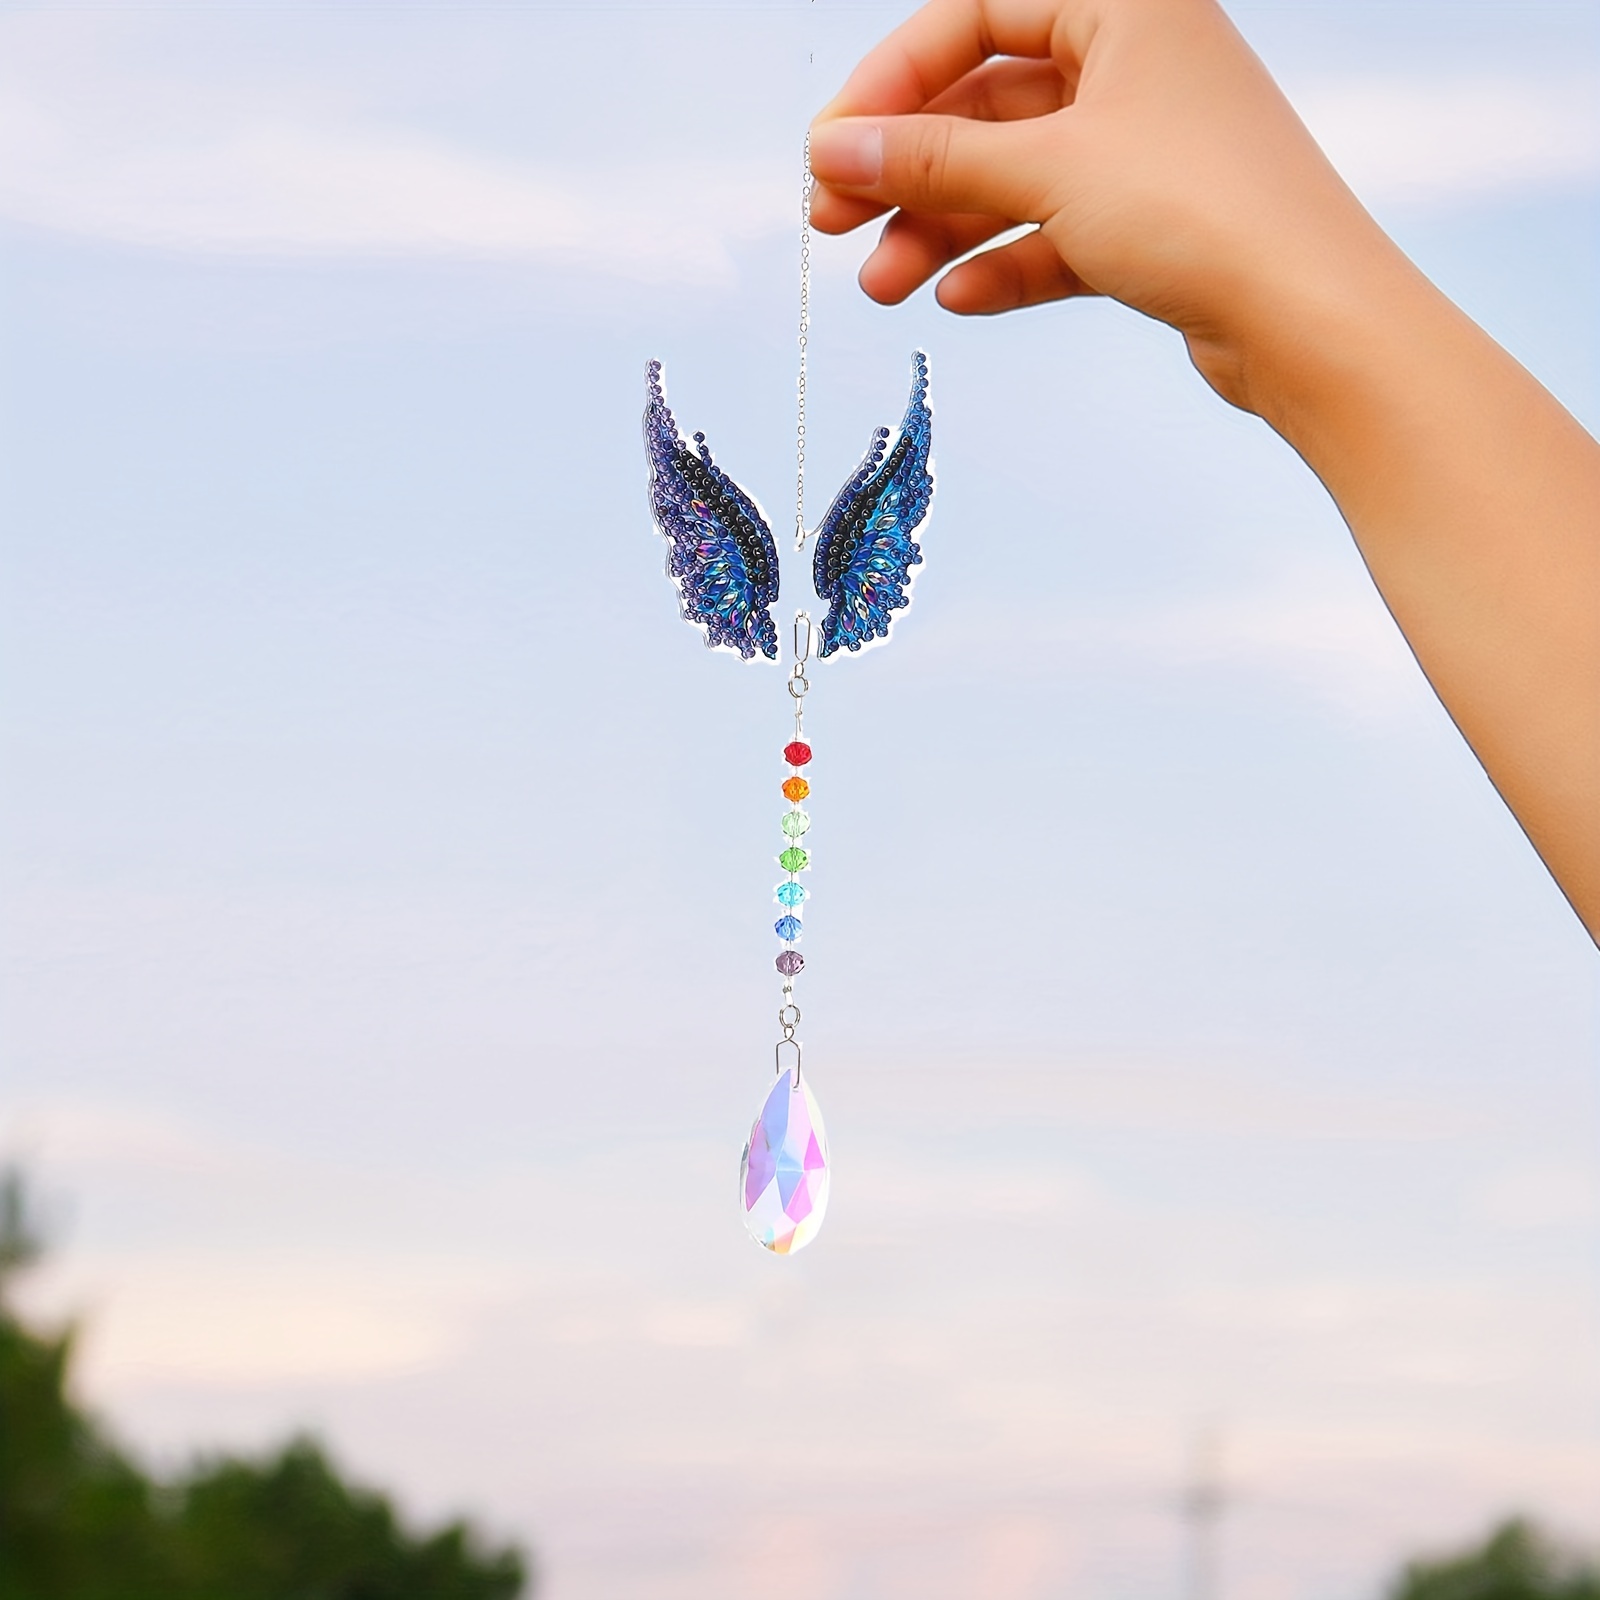 Kigley 12 Pcs Diamond Painting Suncatcher Butterfly Diamond Painting Kits  Diamond Art for Kids Double Sided DIY Wind Chime Kit Paint by Number  Hanging